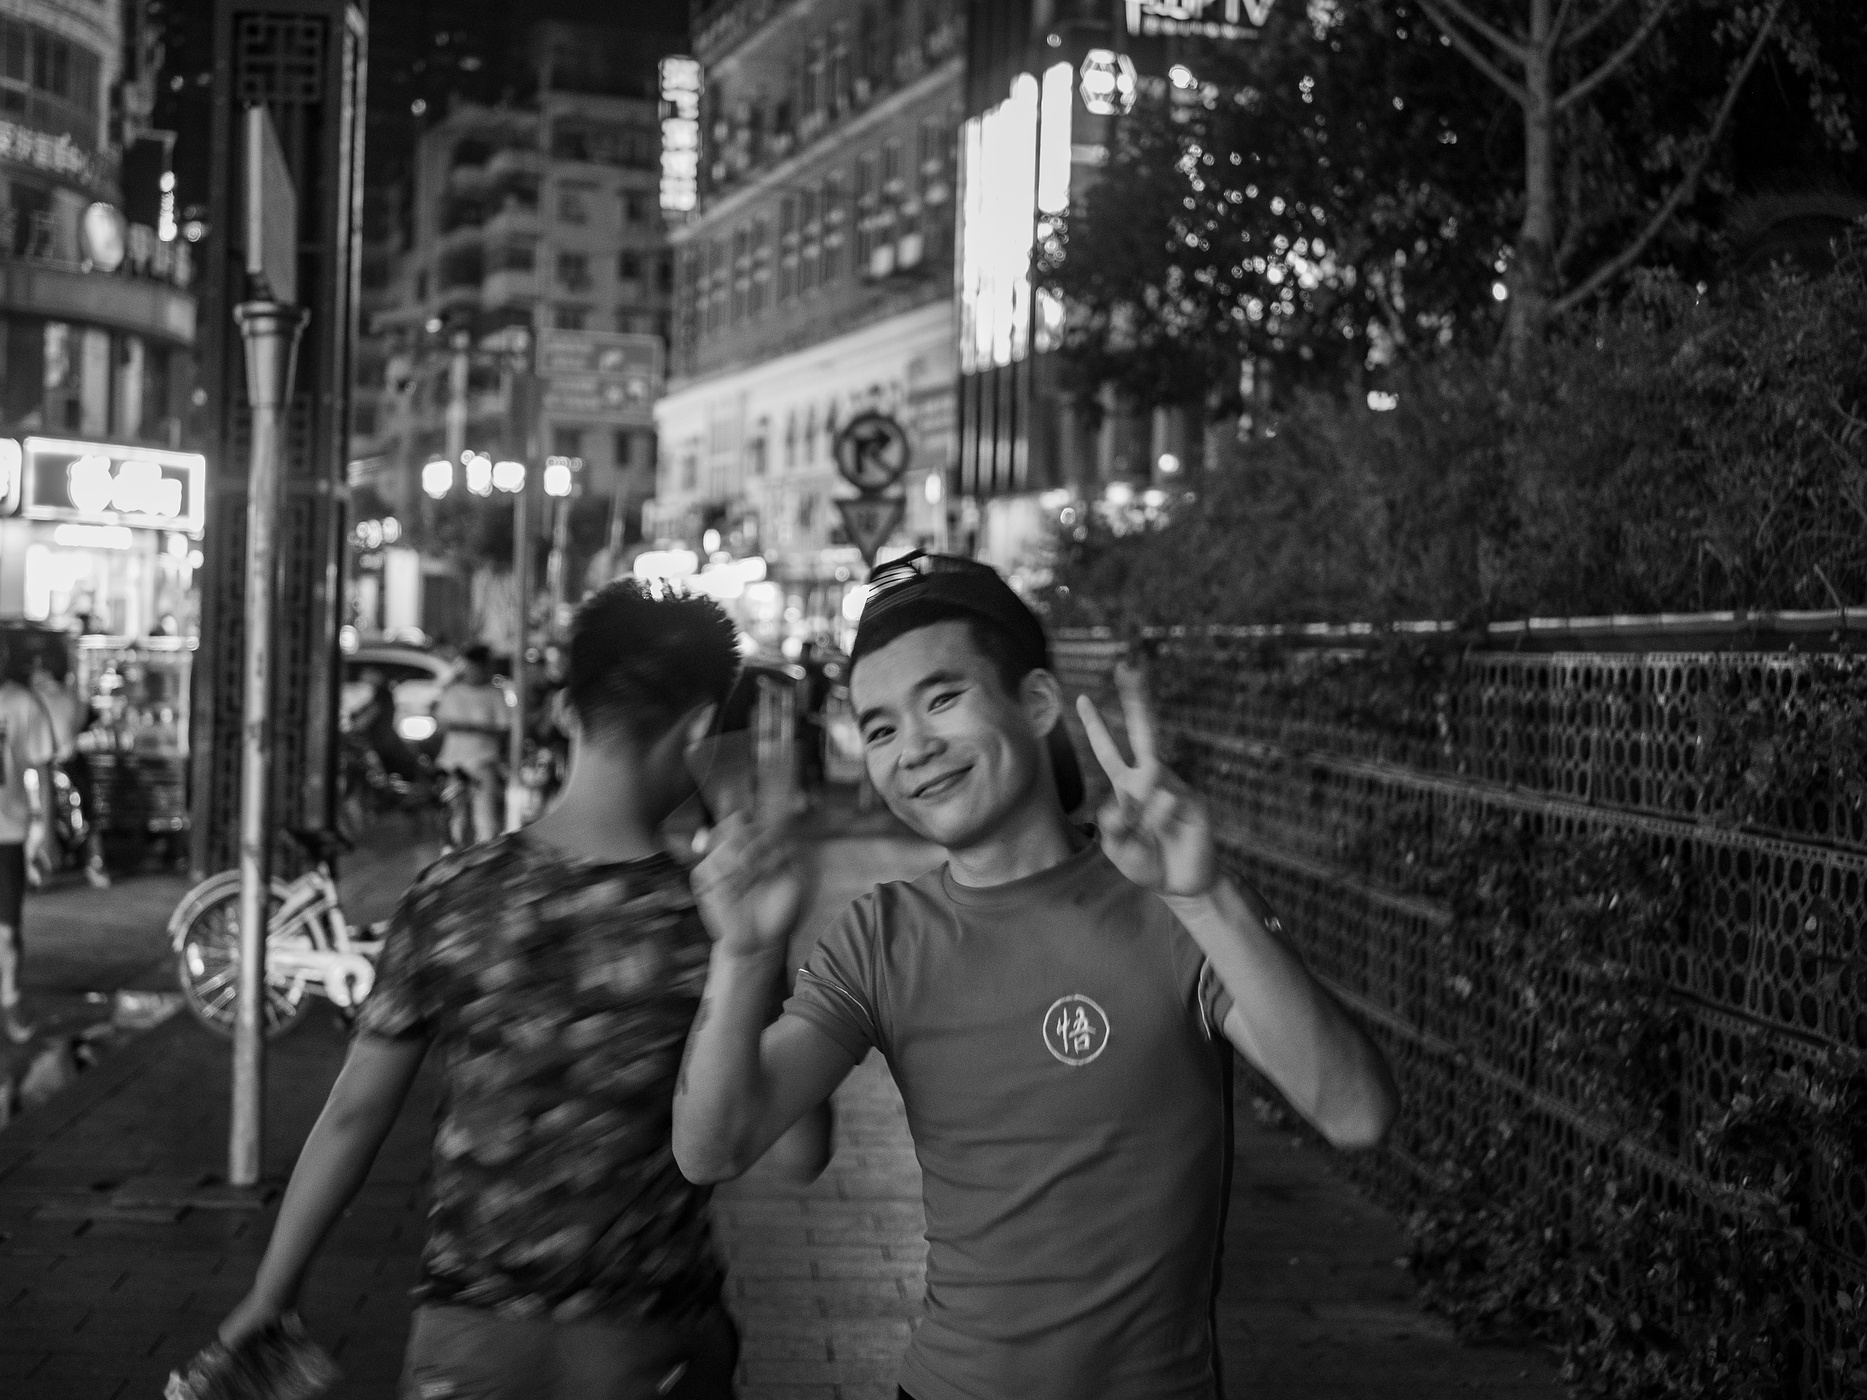 Finding Your Voice in Street Photography: 10 Tips for Developing Your Own Unique Style